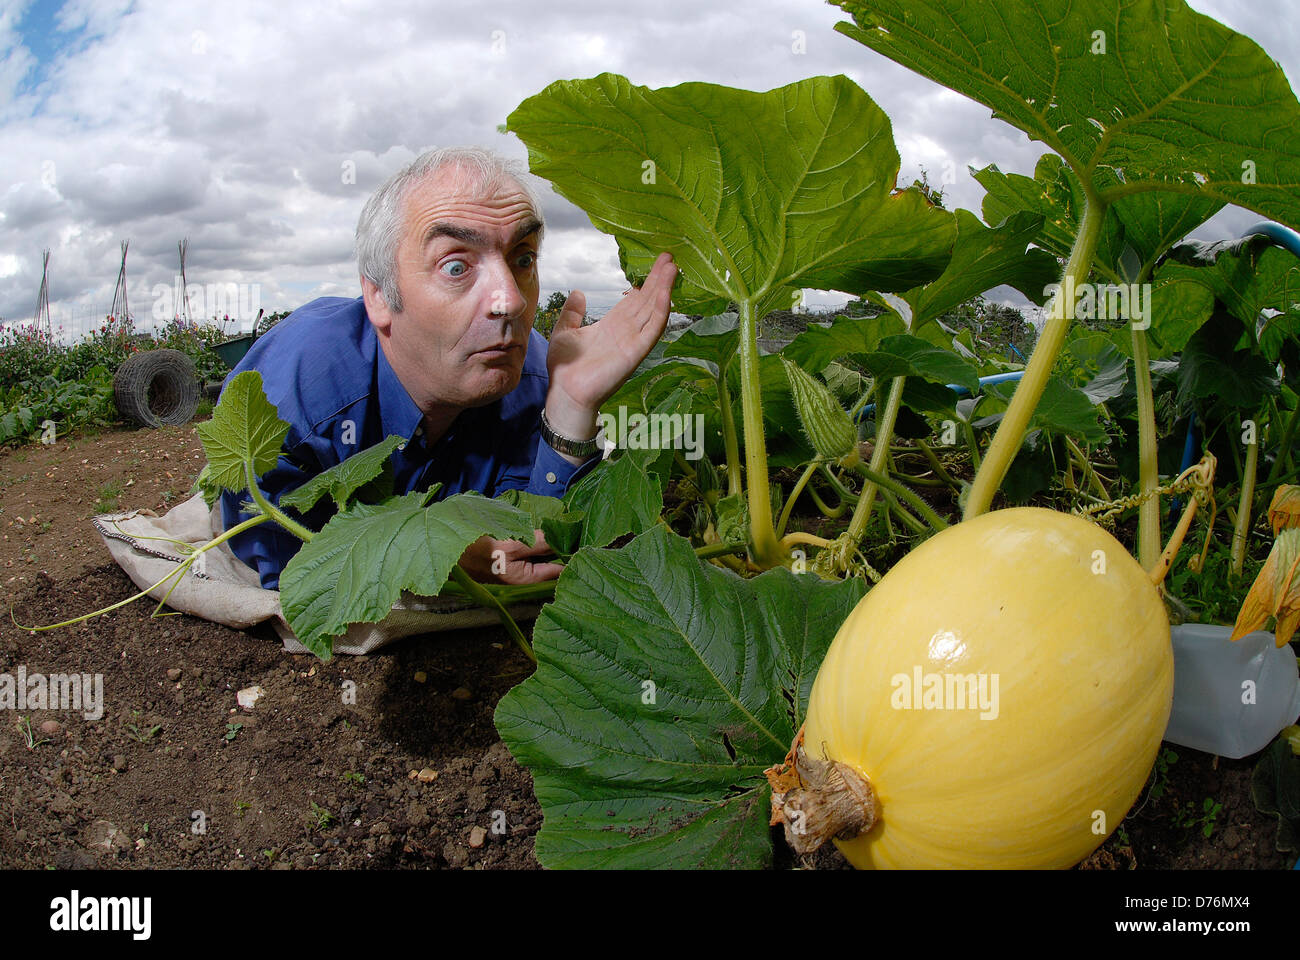 Clive Bevan at his allotment in Great Doddington, Northamptonshire, with a giant pumpkin Stock Photo